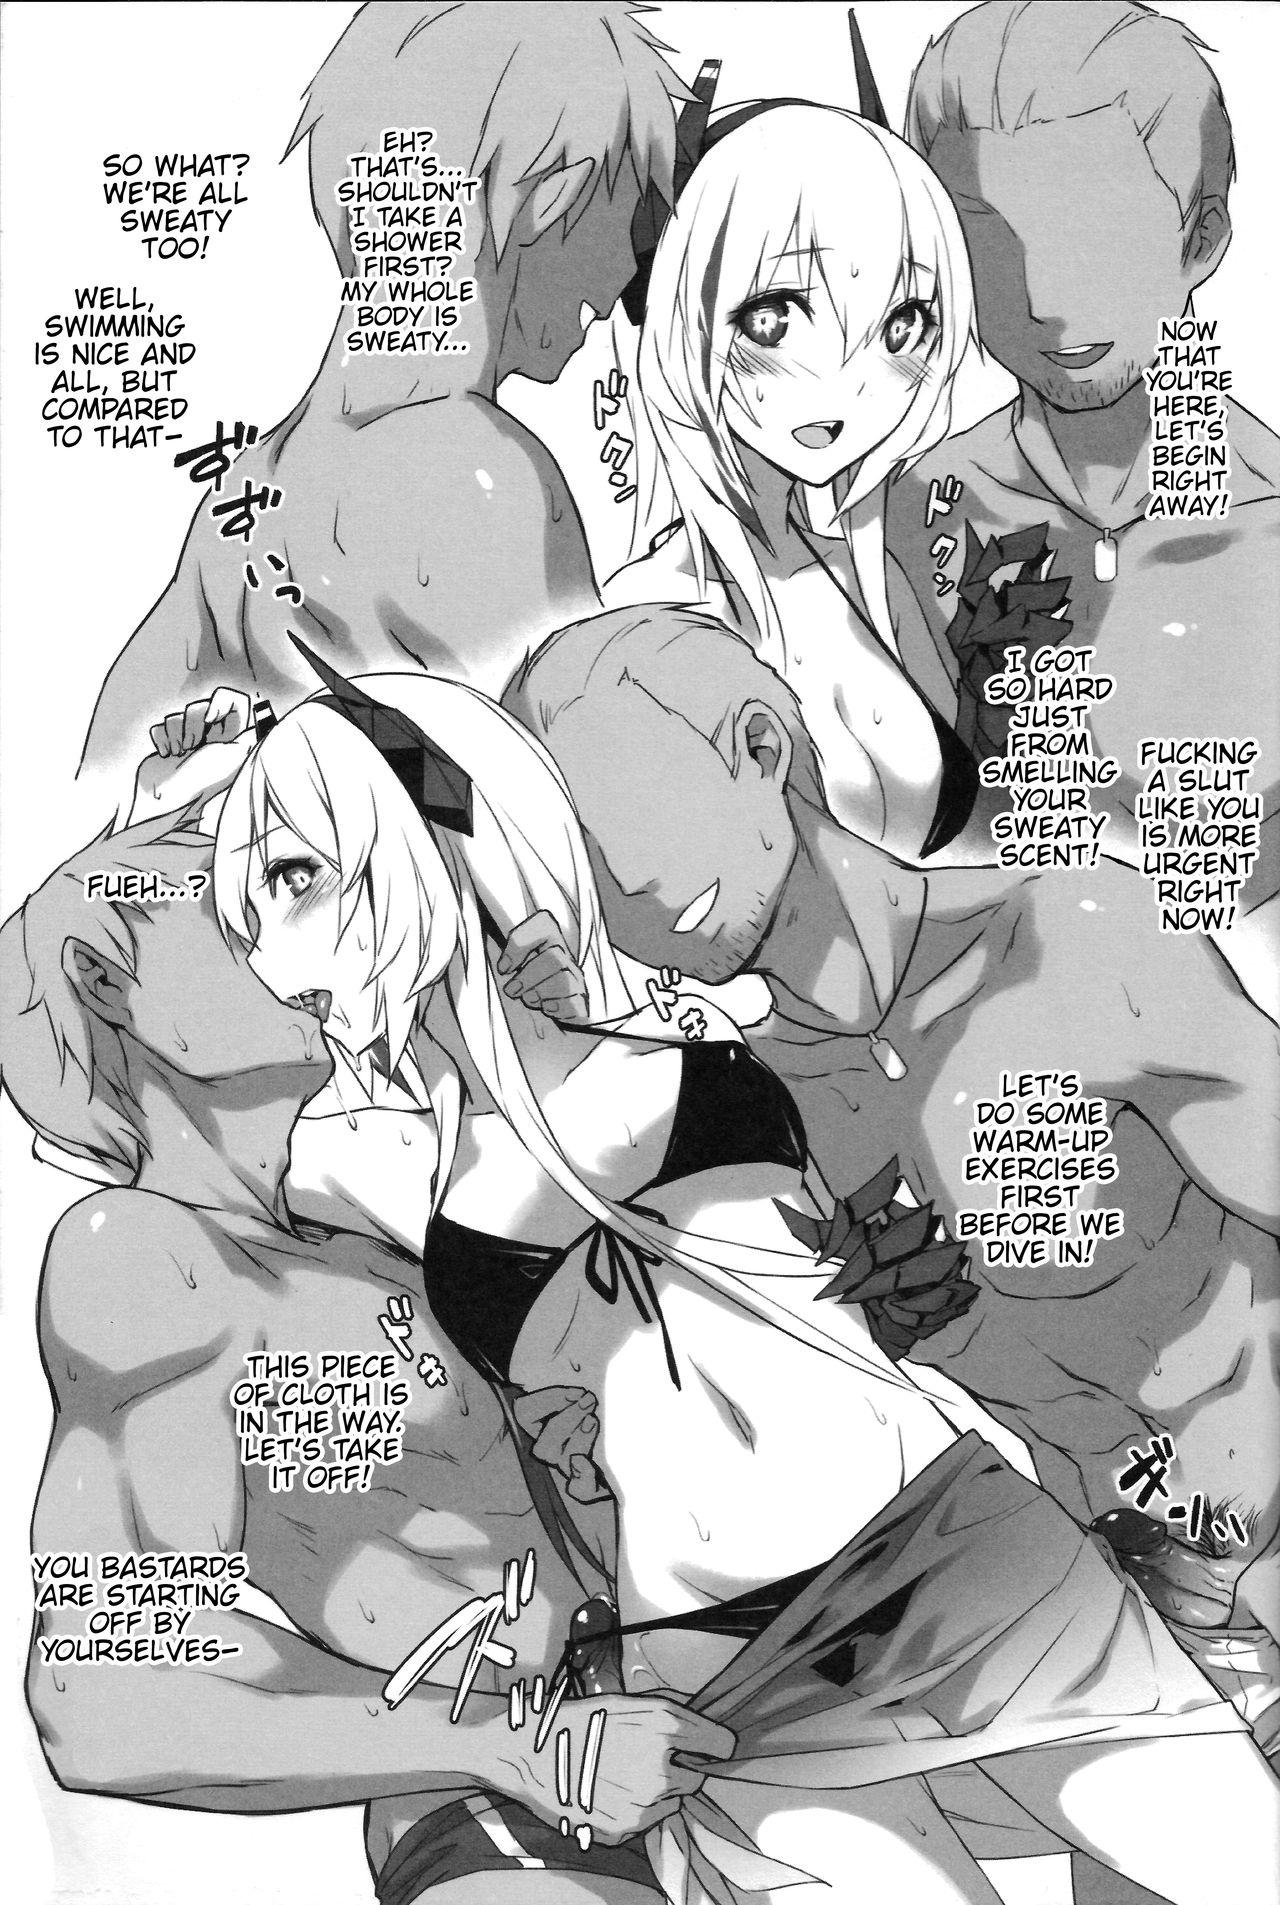 Bald Pussy Grifon Summer Swimsuit Sex Party - Girls frontline Femdom Pov - Page 4